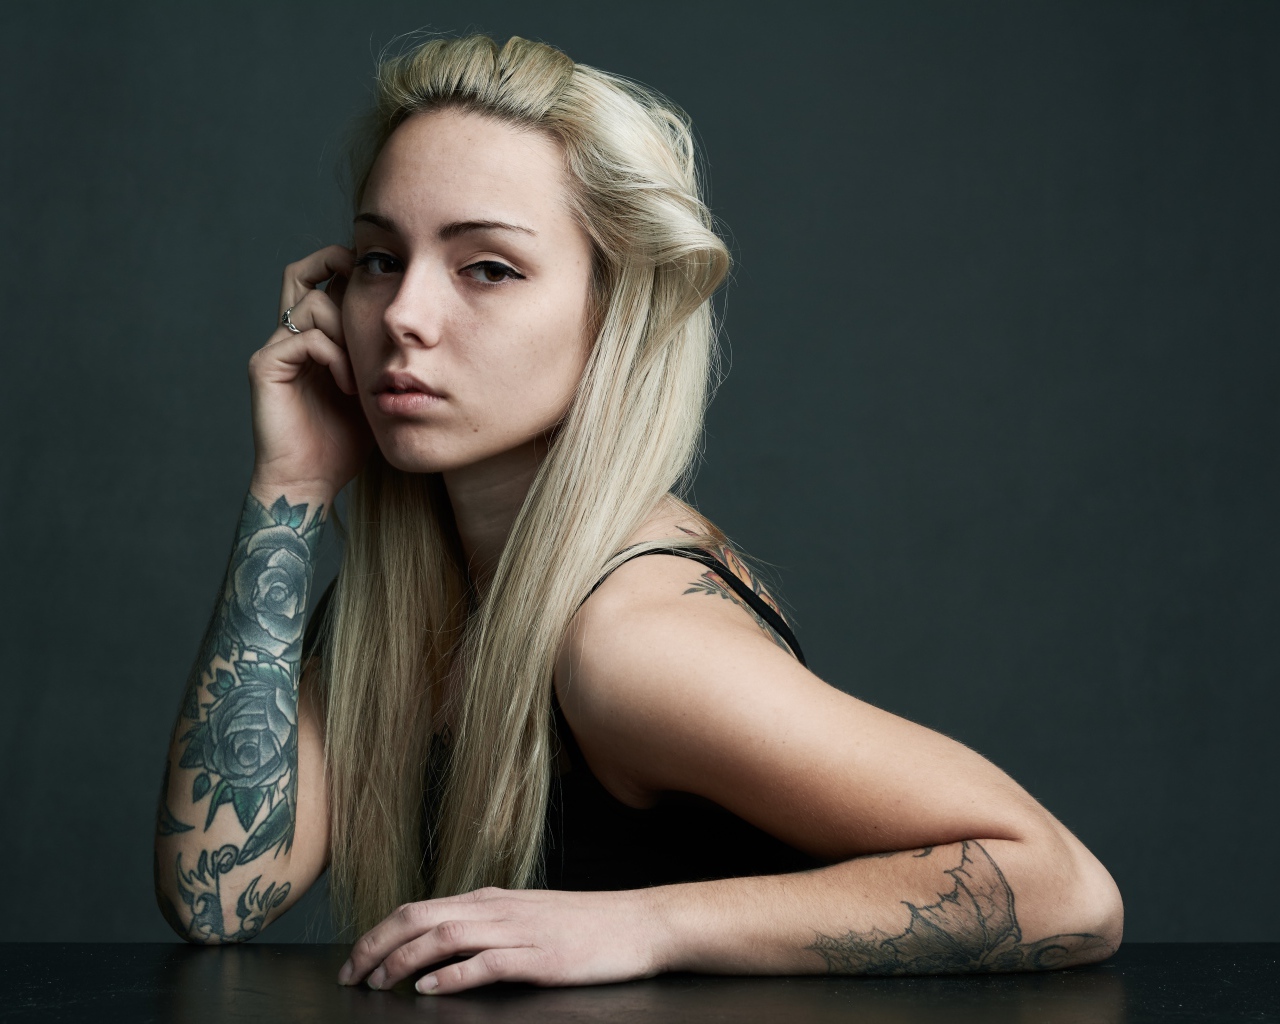 Beautiful blonde with tattoos on her body on a gray background